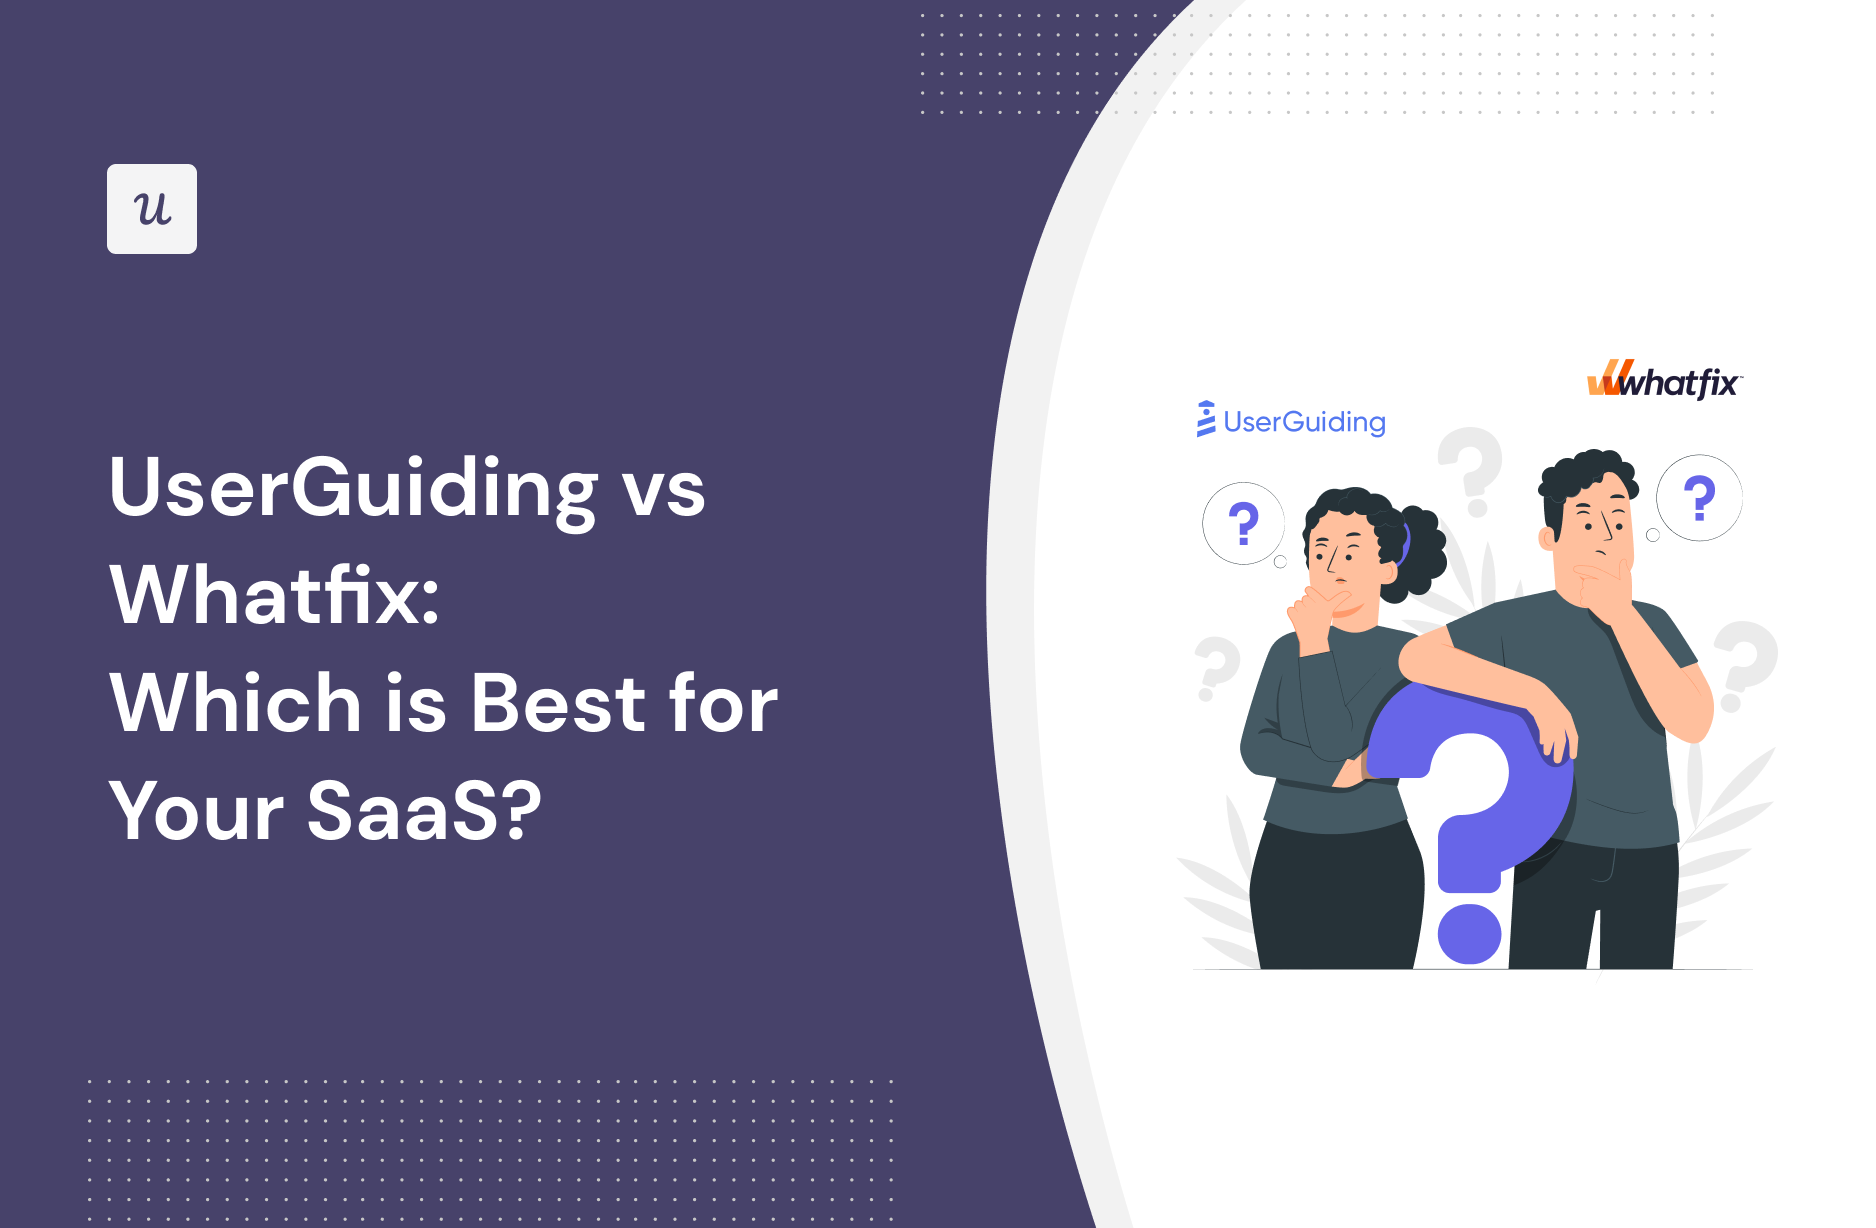 UserGuiding vs Whatfix: Which Is Best for Your SaaS?